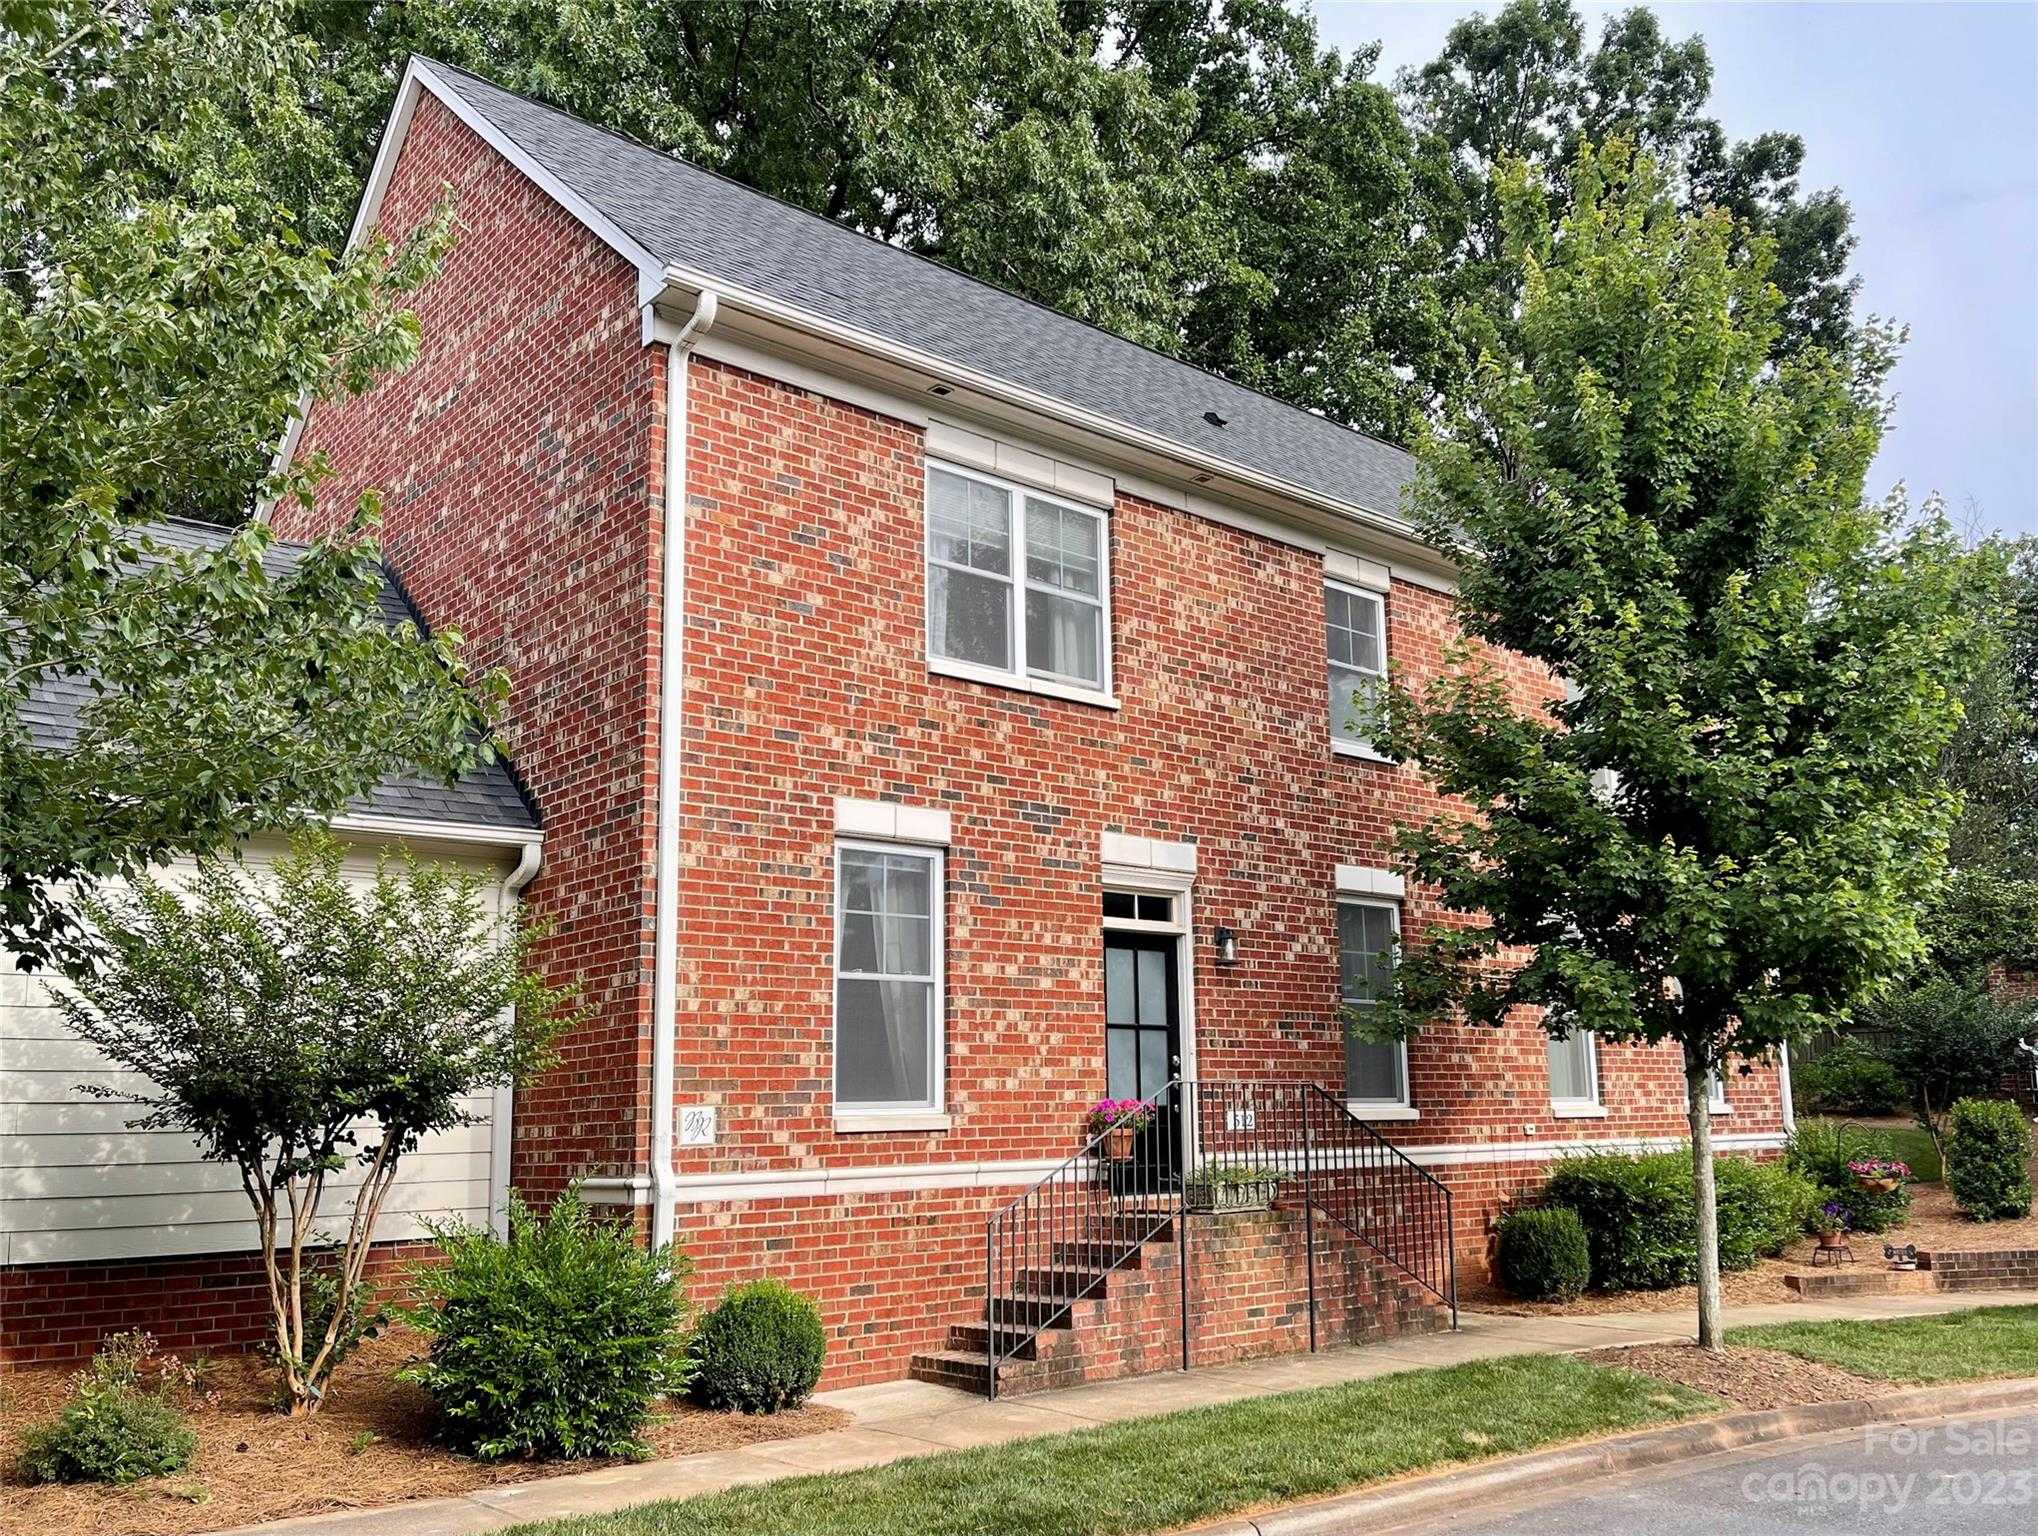 View Belmont, NC 28012 townhome